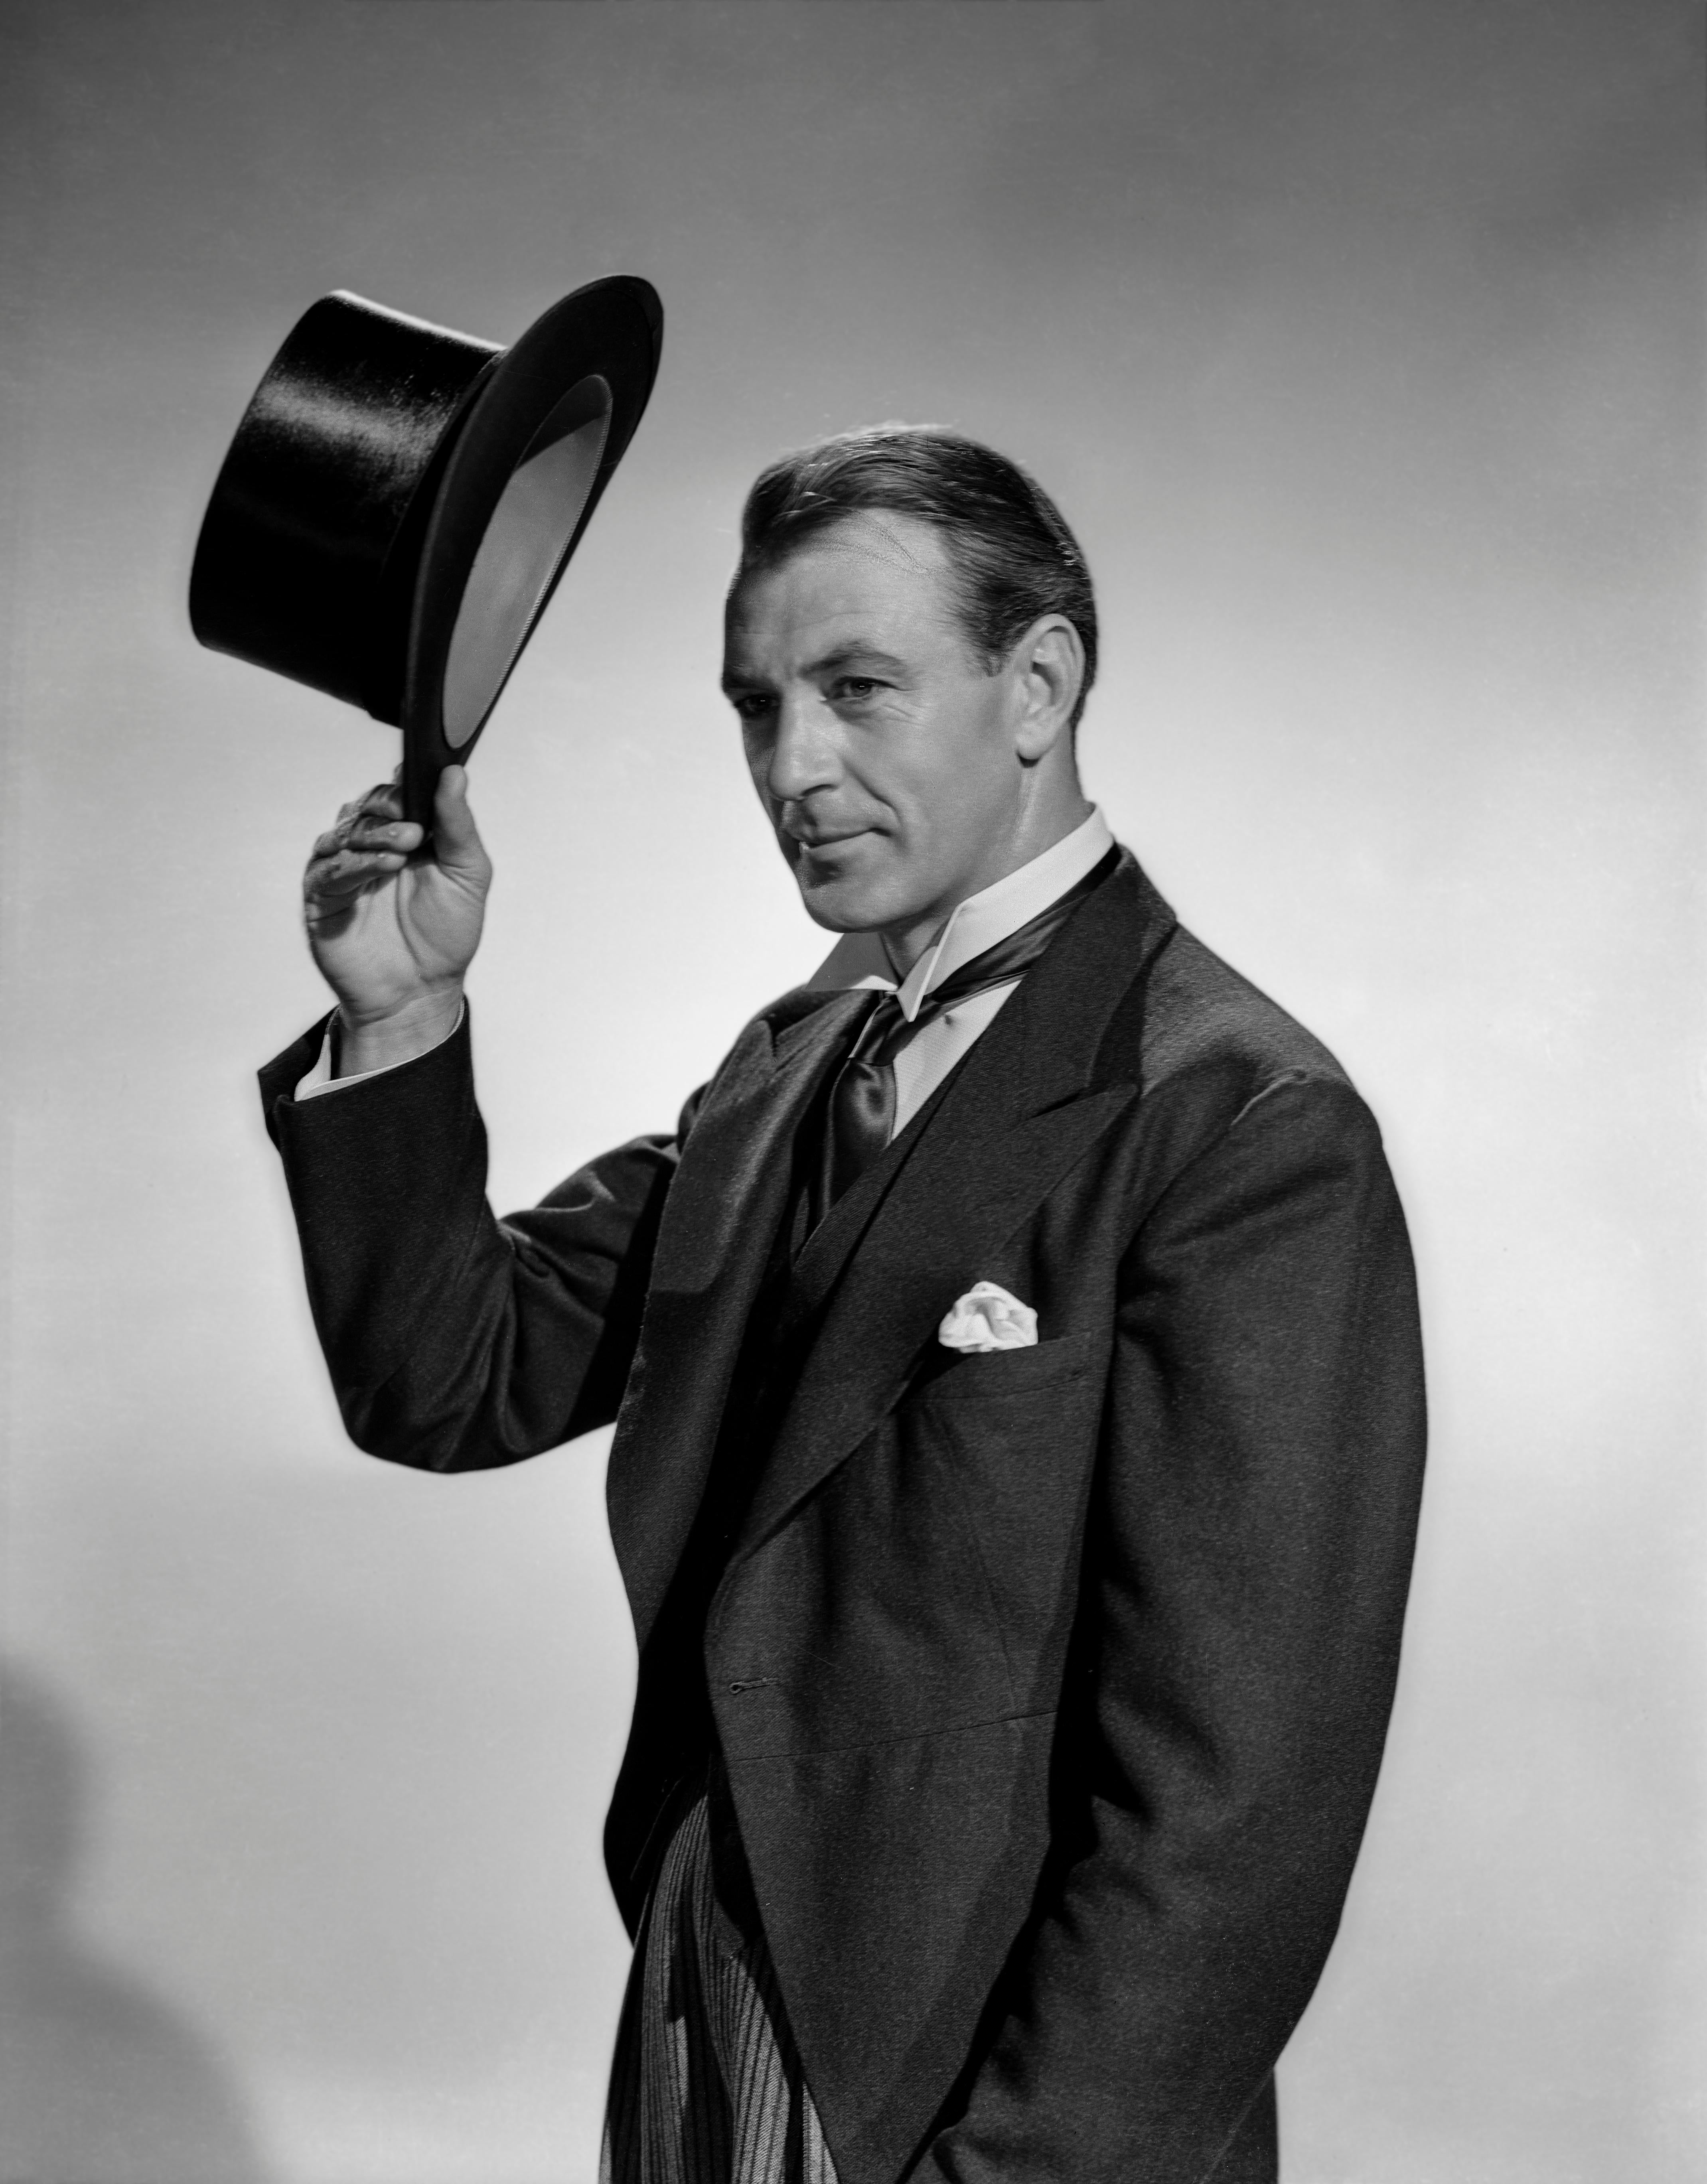 Unknown Portrait Photograph - Gary Cooper Tipping Tophat Movie Star News Fine Art Print